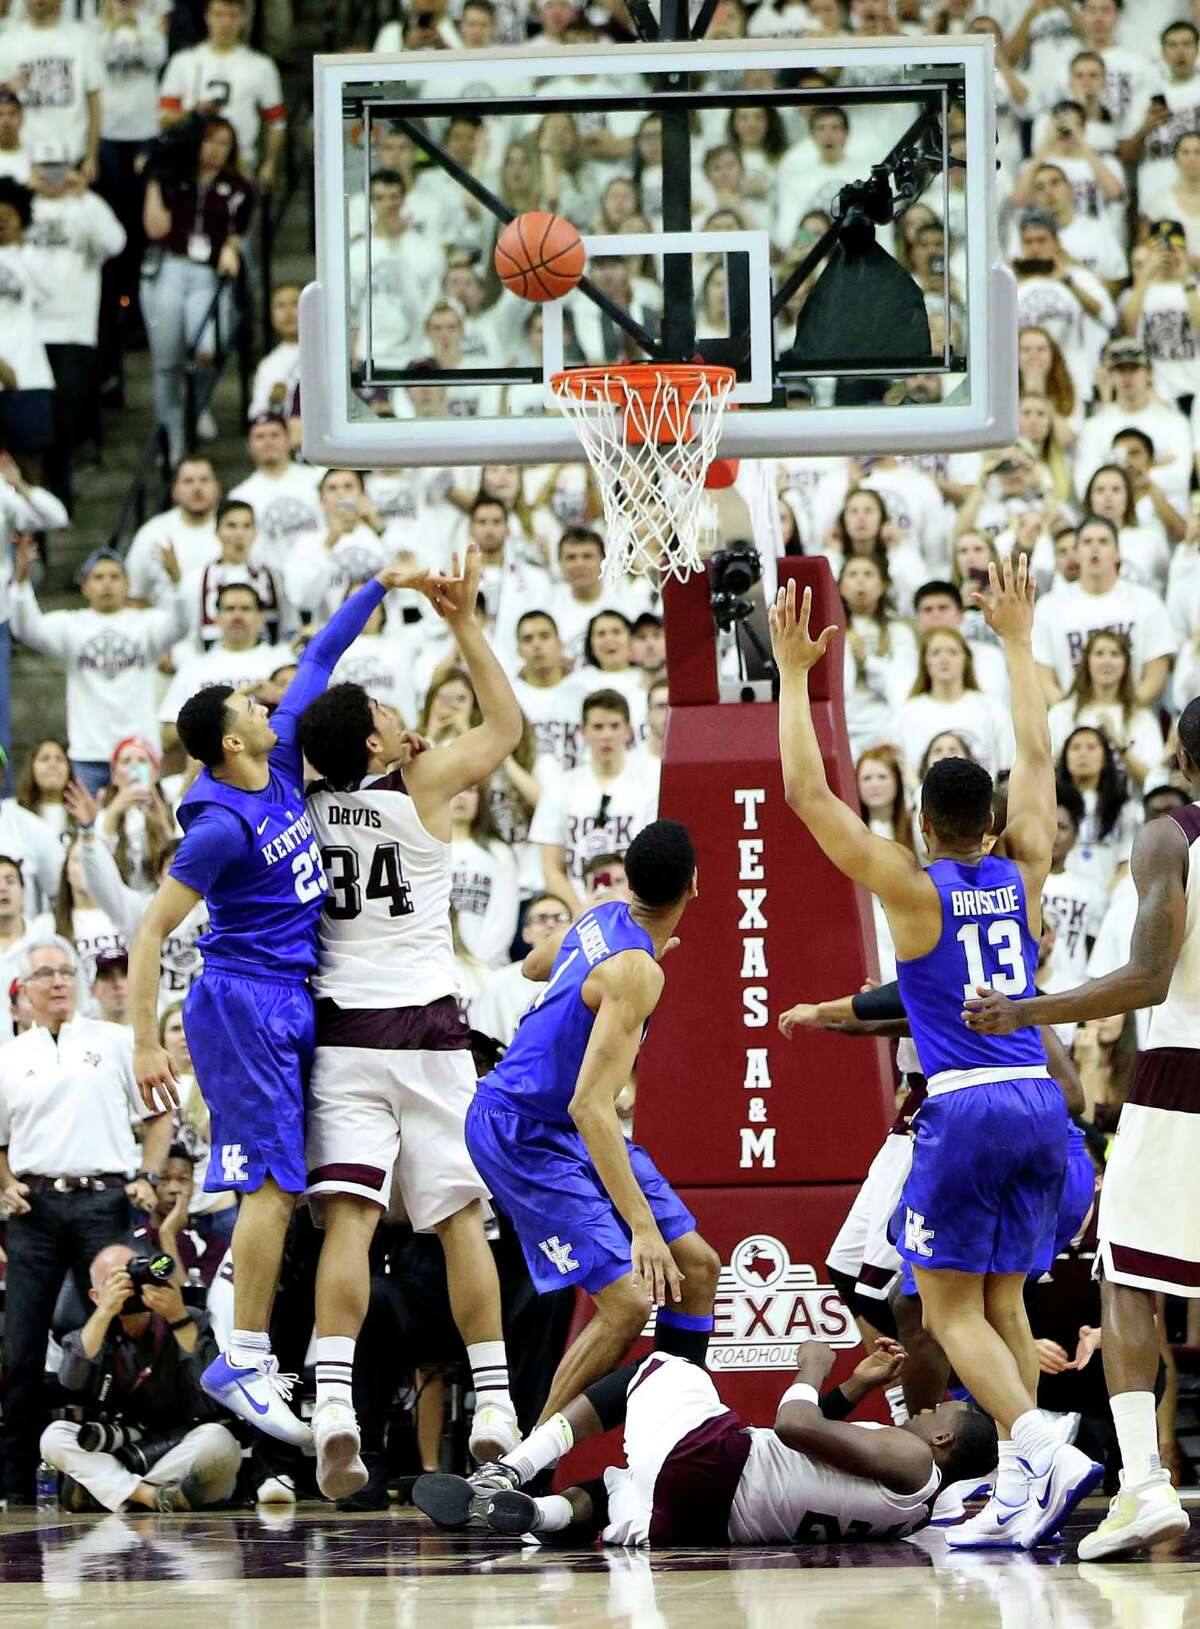 Texas A&M's Tyler Davis (34) makes a shot at the buzzer as Kentucky's Jamal Murray (23) defends during overtime of an NCAA college basketball game, Saturday, Feb. 20, 2016, in College Station, Texas. Texas A&M won 79-77. (AP Photo/Sam Craft)